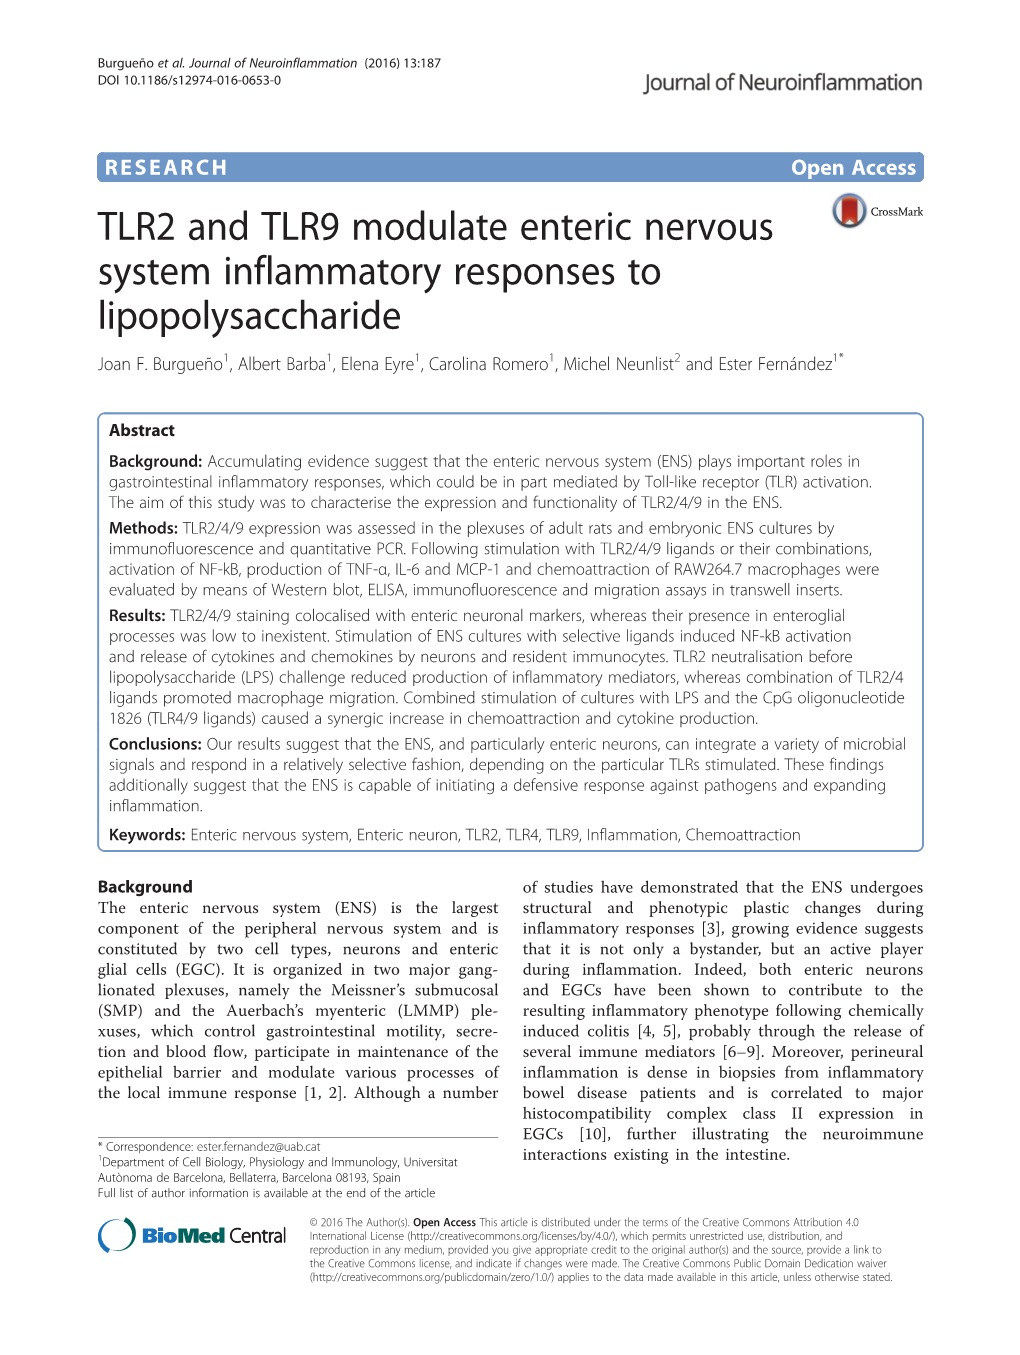 TLR2 and TLR9 Modulate Enteric Nervous System Inflammatory Responses to Lipopolysaccharide Joan F